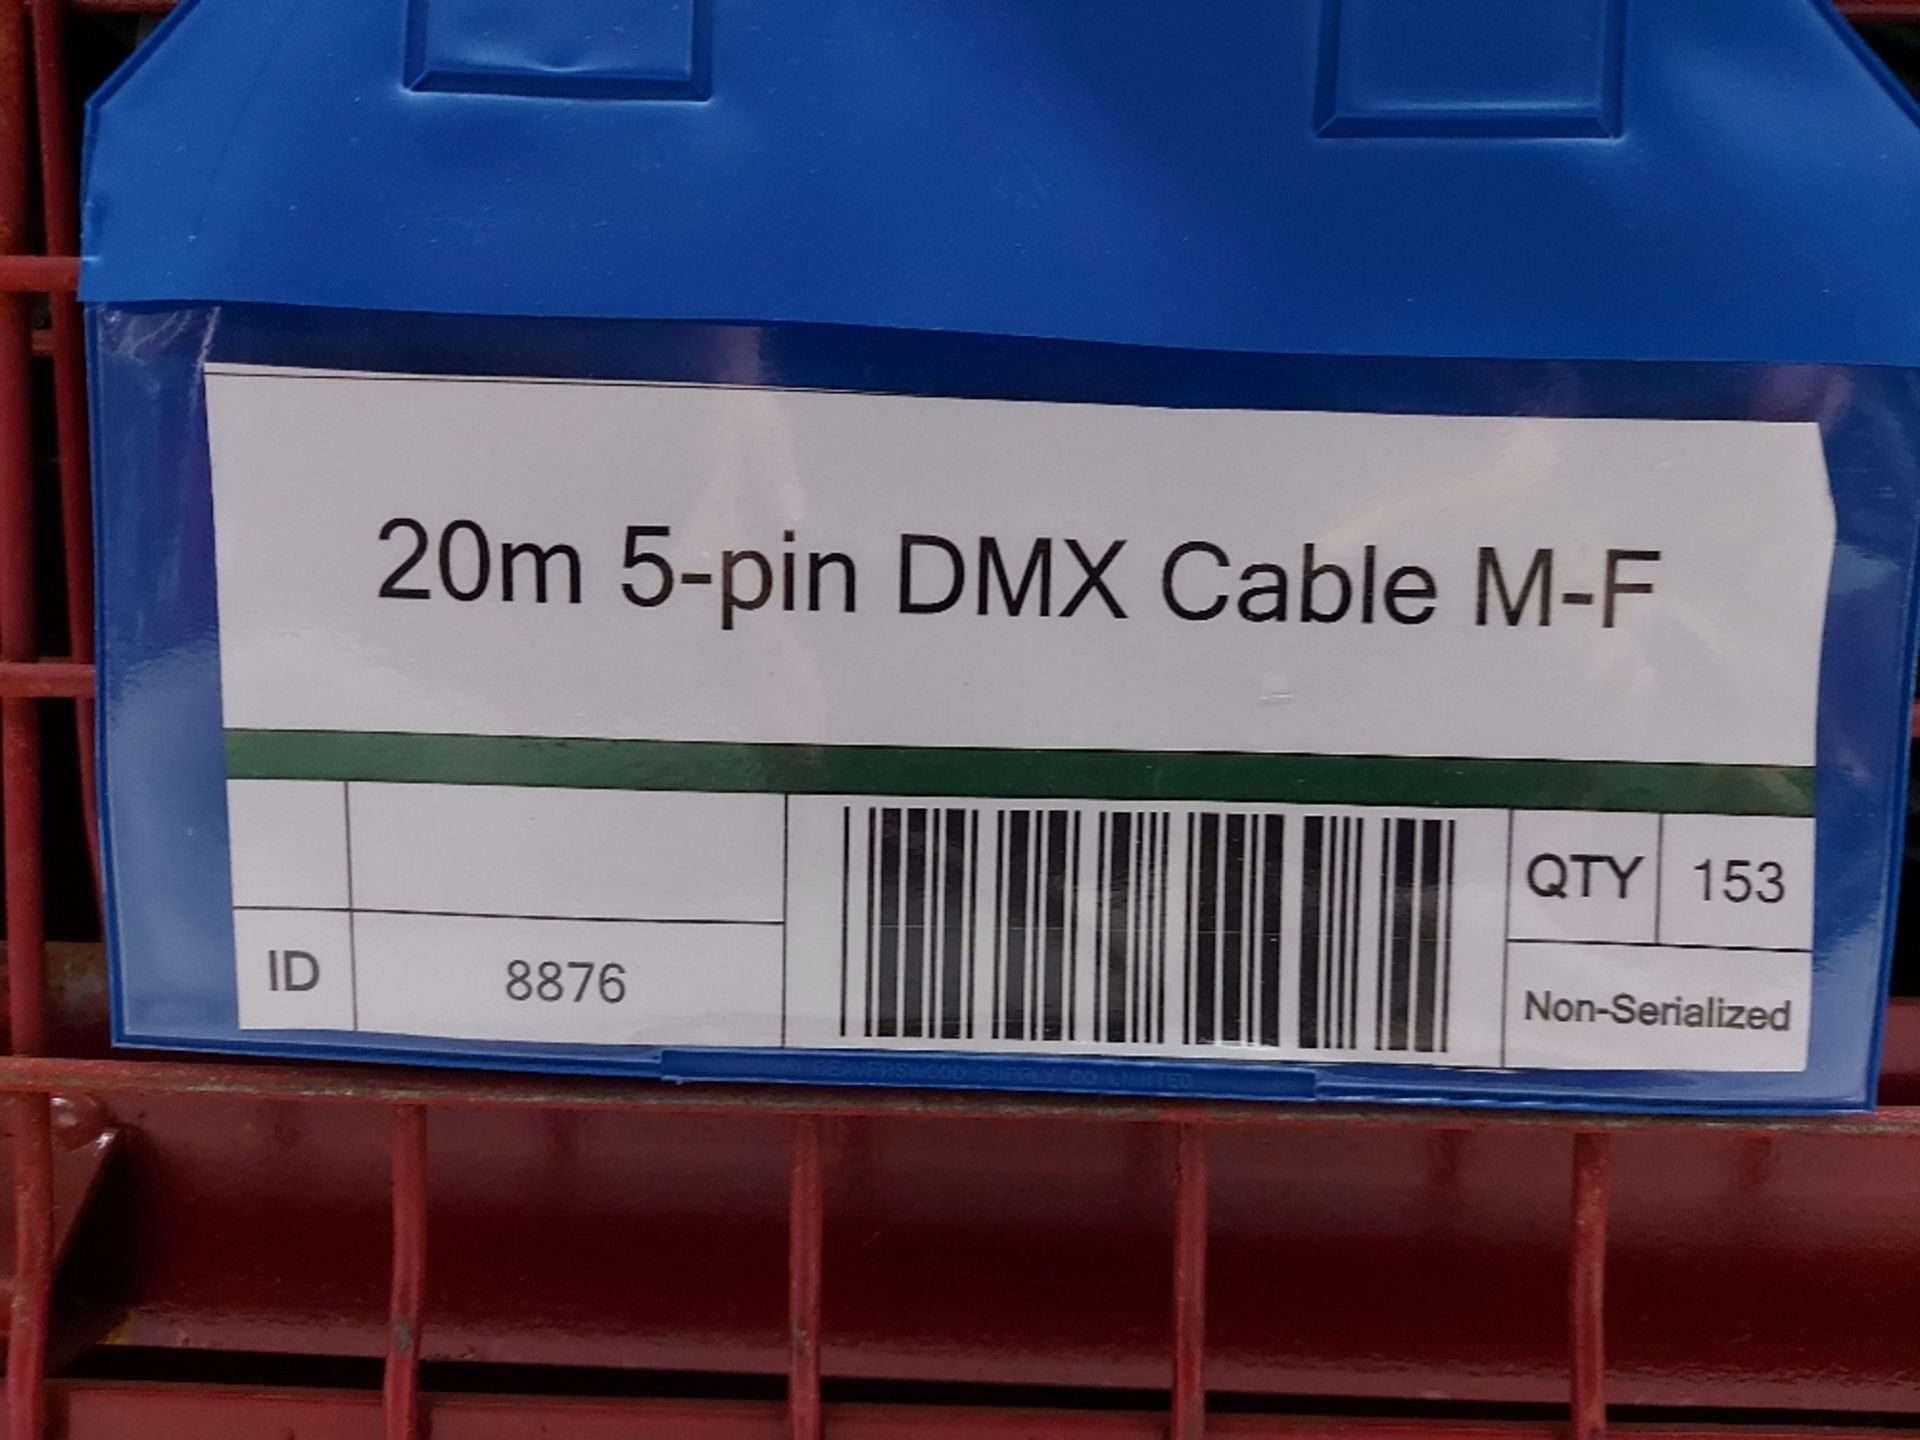 20mtr 5-Pin DMX Cable M-F with Steel Fabricated Stillage - Image 4 of 4